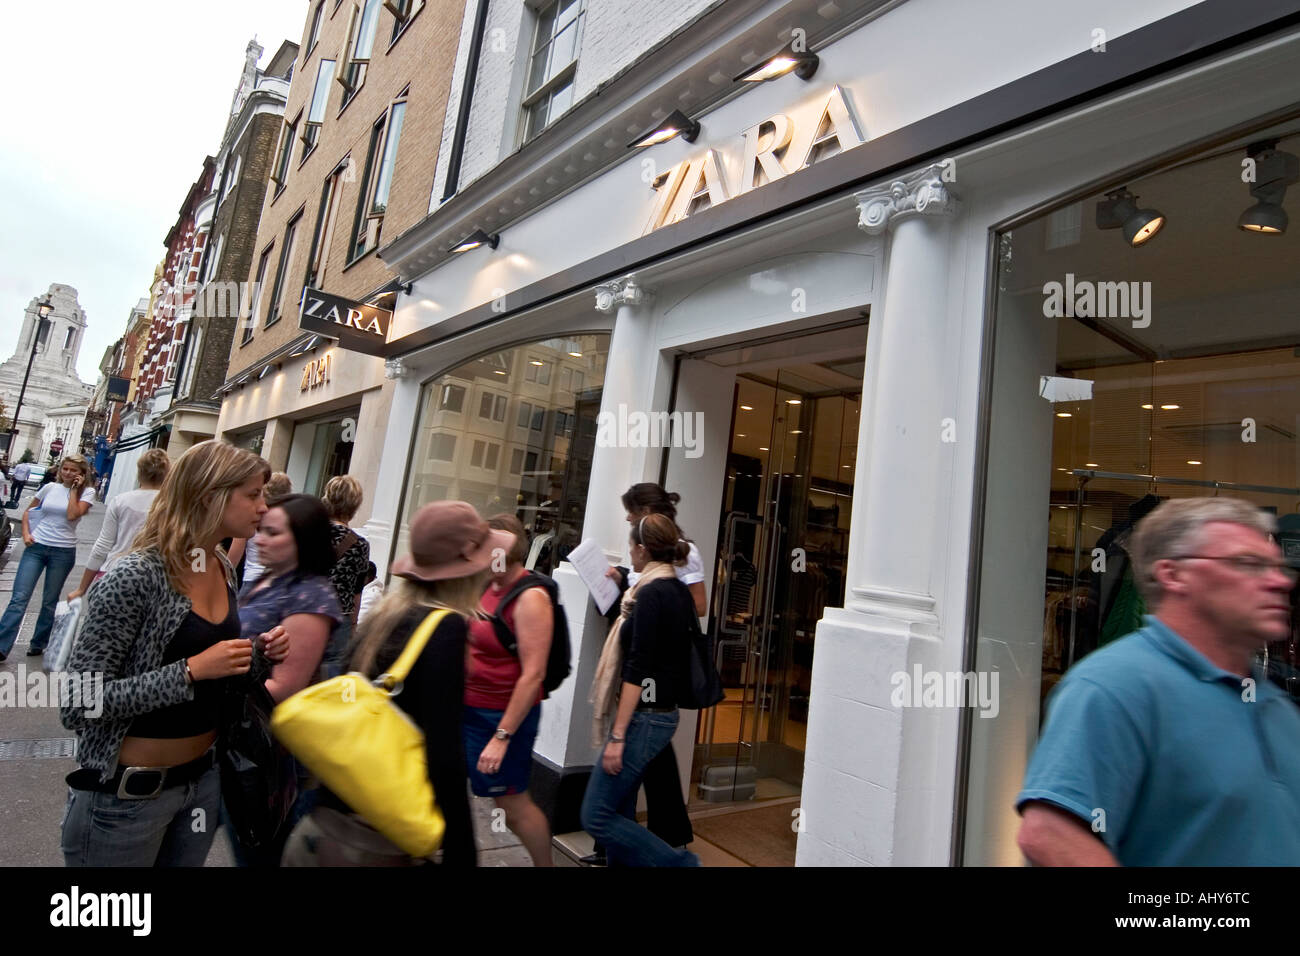 Zara clothes store in Covent Garden London Stock Photo - Alamy